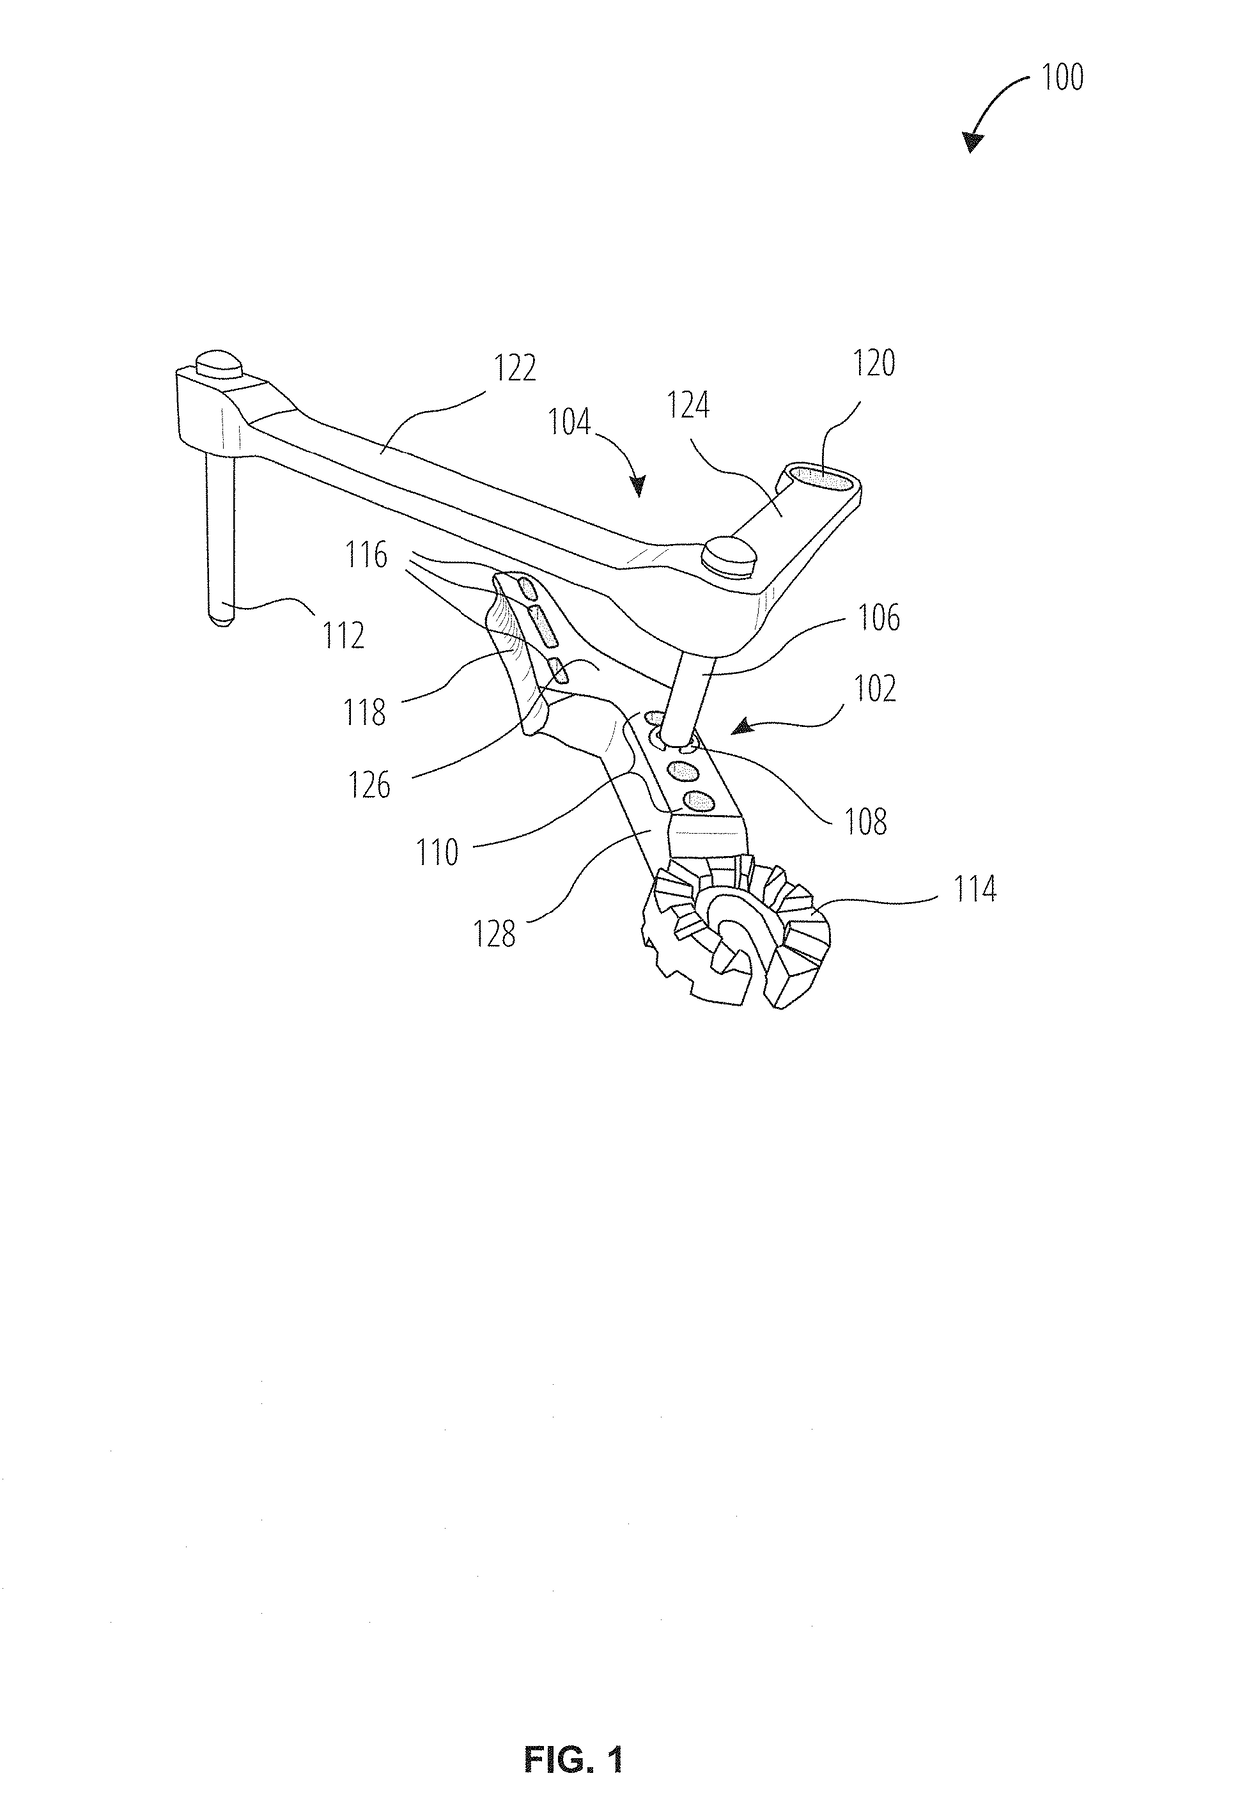 Power tool adapter for remotely actuating a power tool mounted on an end of a hot stick using an insulating pull-rope